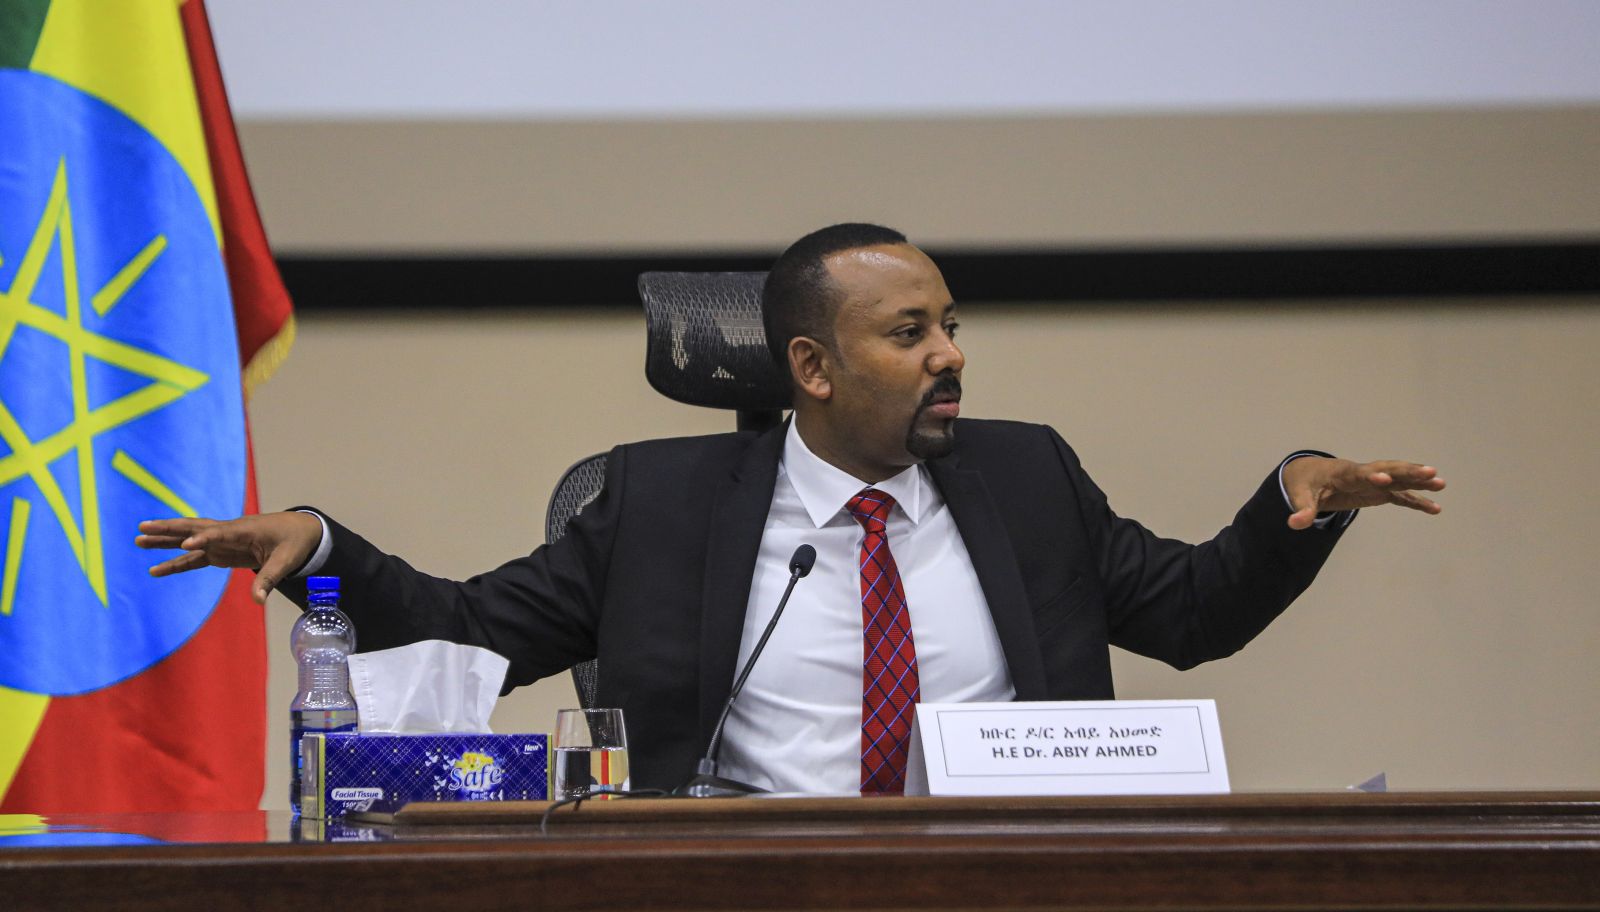 epa08852859 Ethiopian Prime Minister Abiy Ahmed speaks during a question and answer session in parliament, Addis Ababa, Ethiopia 30 November 2020. Ethiopia’s military intervention in the northern Tigray region comes after Tigray People's Liberation Front (TPLF) forces allegedly attacked an army base on 03 November 2020 sparking weeks of unrest with over 40,000 refugees fleeing to Sudan.  EPA/STR